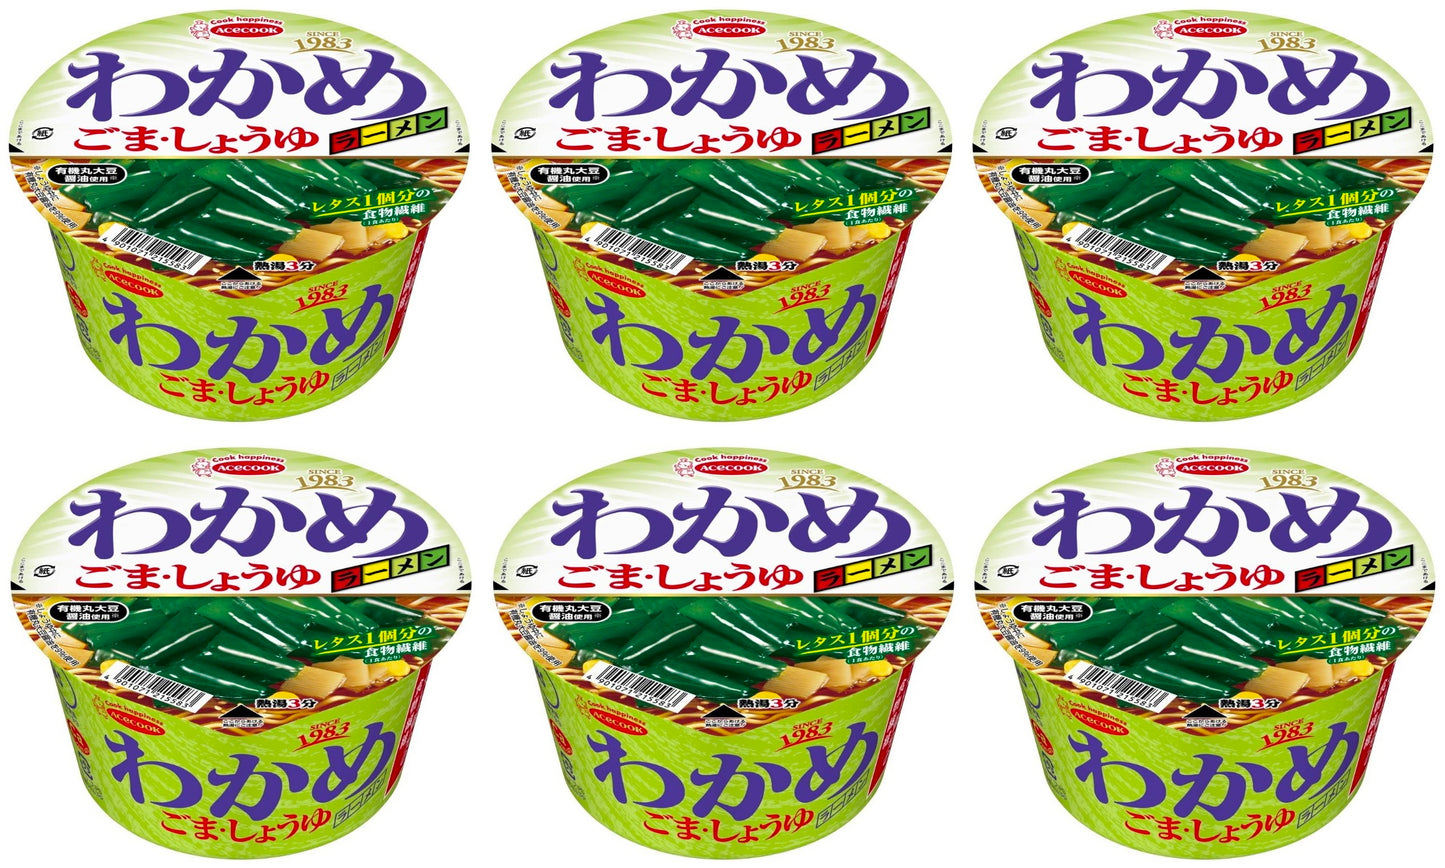 Japanese Ramen Noodle Wakame Seaweed Soy Sauce Instant Food Soup Cup Acecook 93g